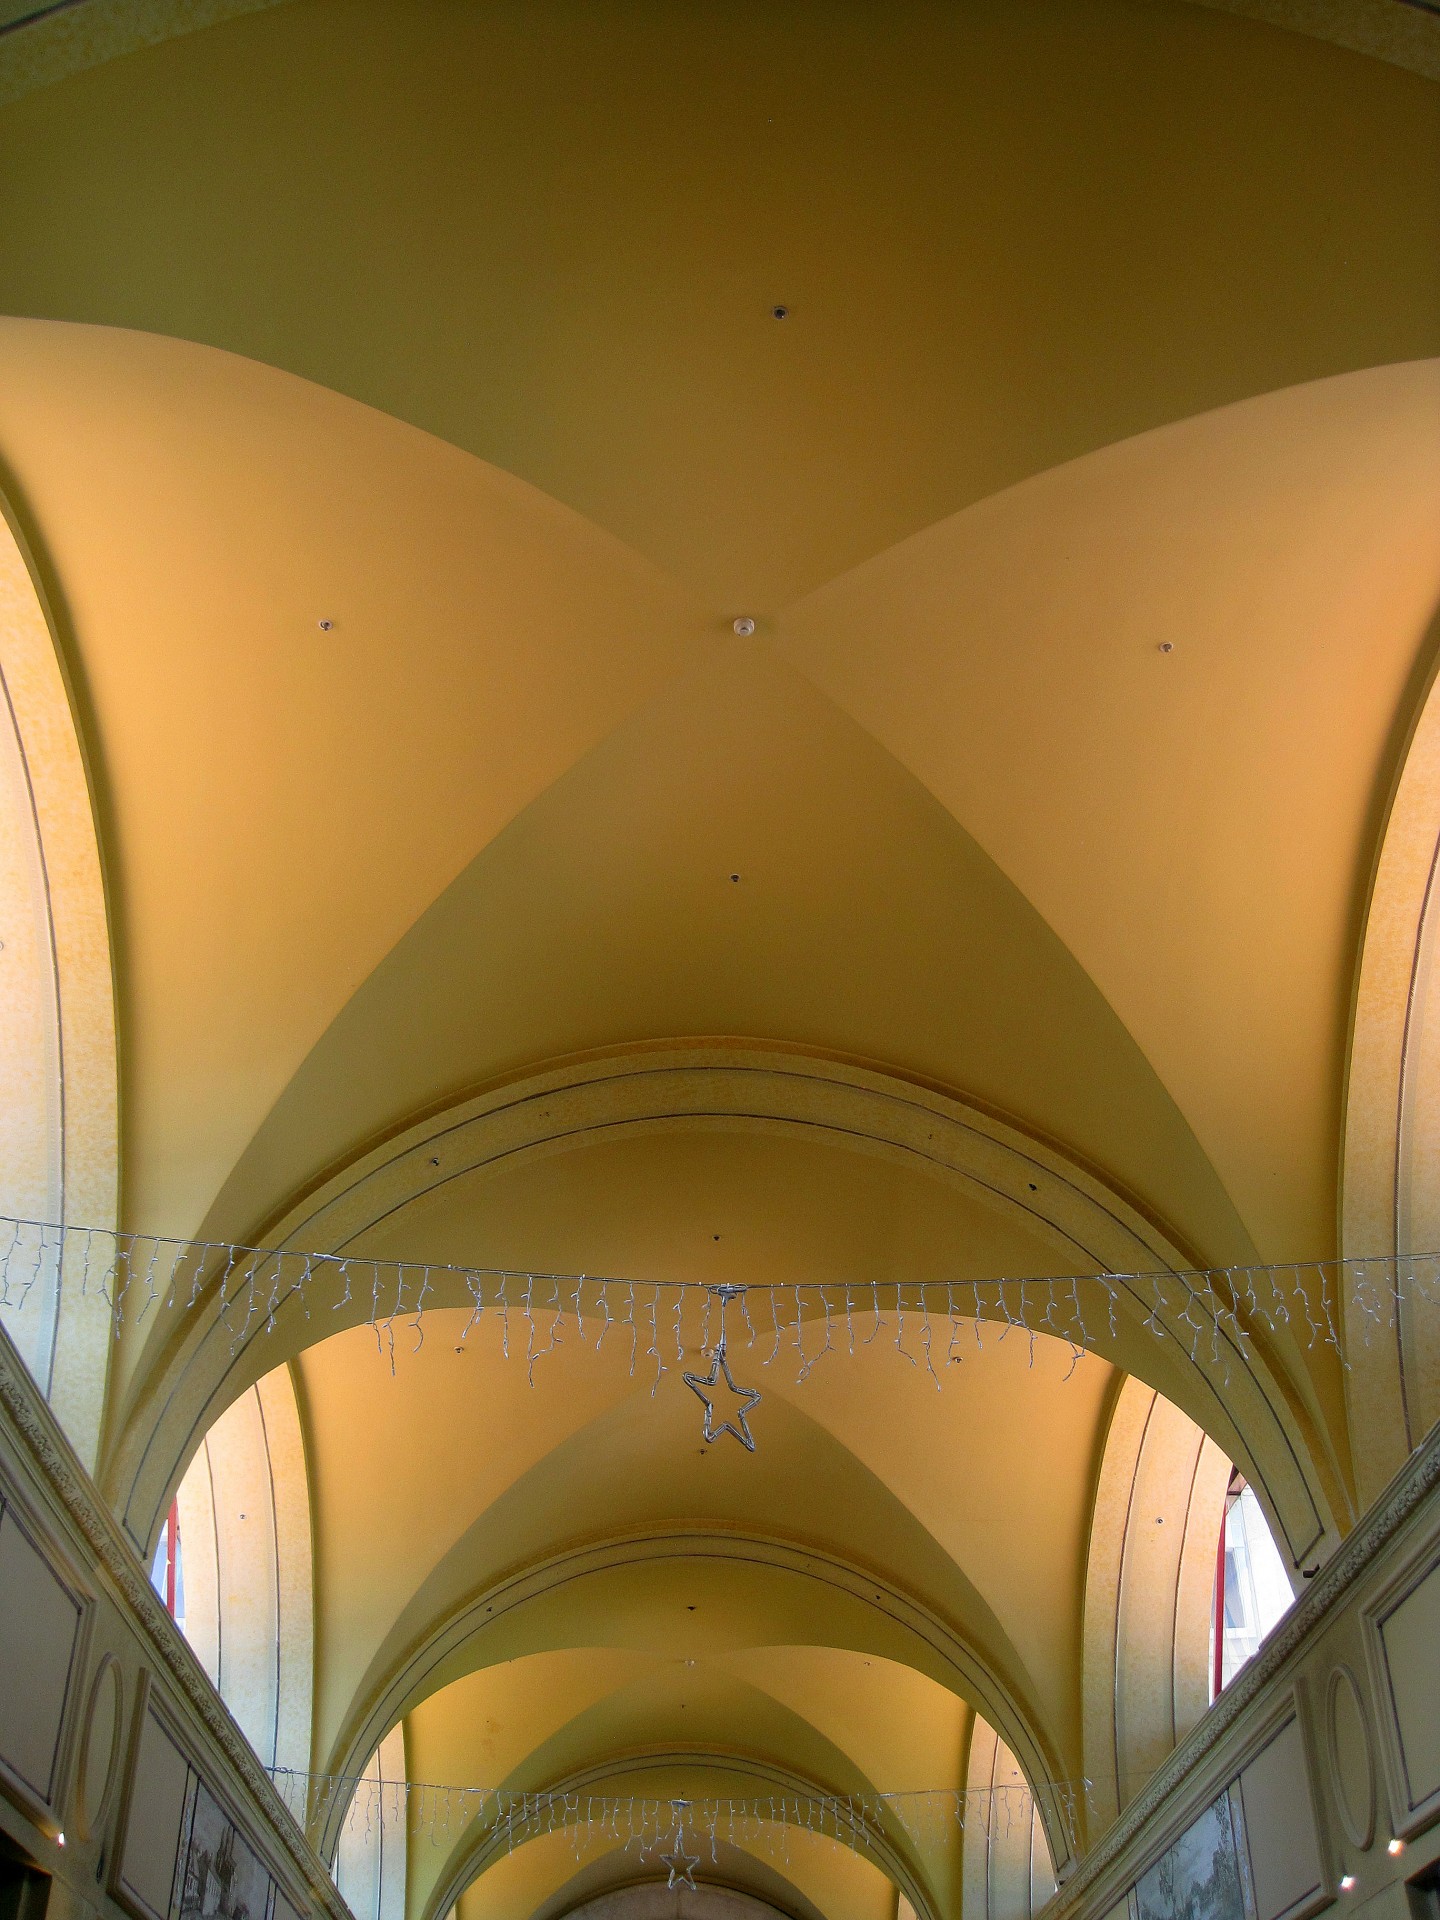 ceiling vaulted architecture free photo